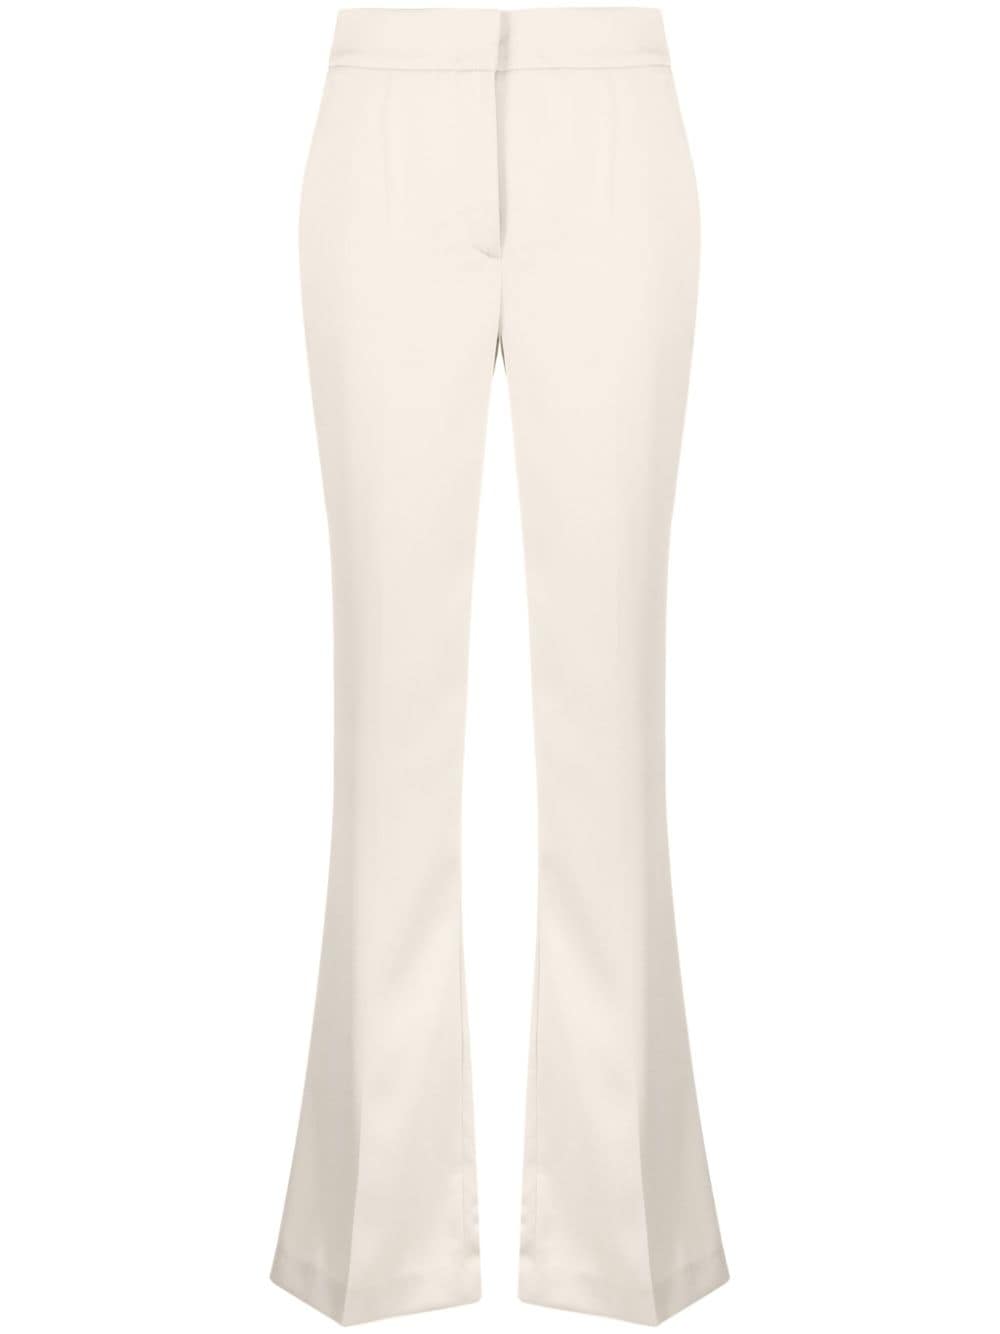 Iconic high-waist flared trousers<BR/><BR/><BR/>